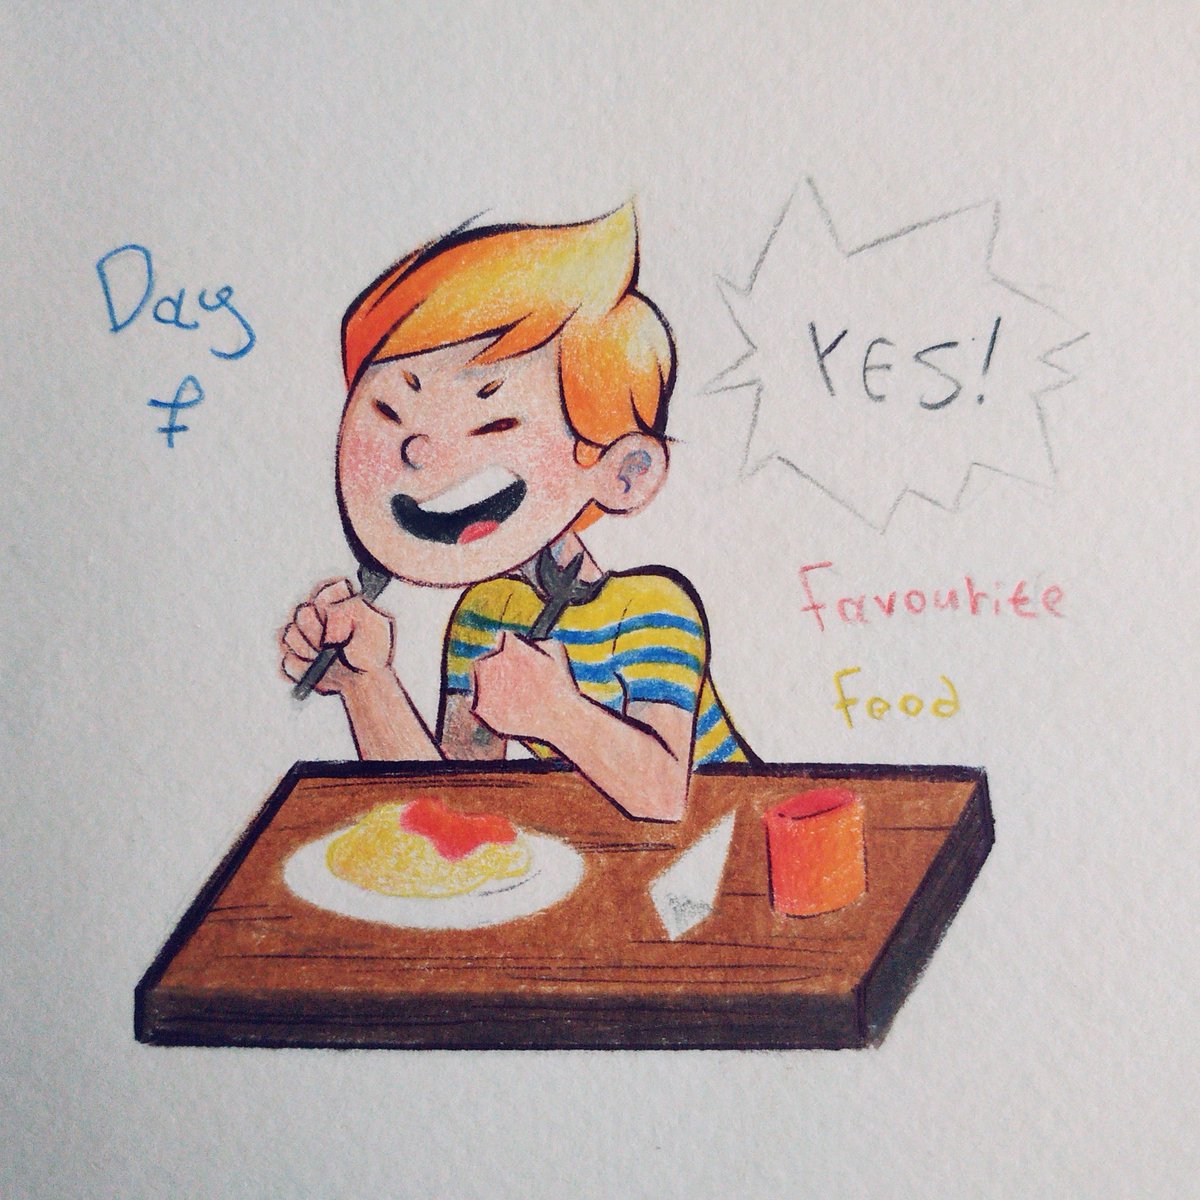 Day 7 of M🌍THERtober and the prompt is #FavouriteFood ! I've only done one Mother 3 drawing for this challenge so far, so I thought I'd draw Claus, who I unexpectedly haven't drawn before 👀💞